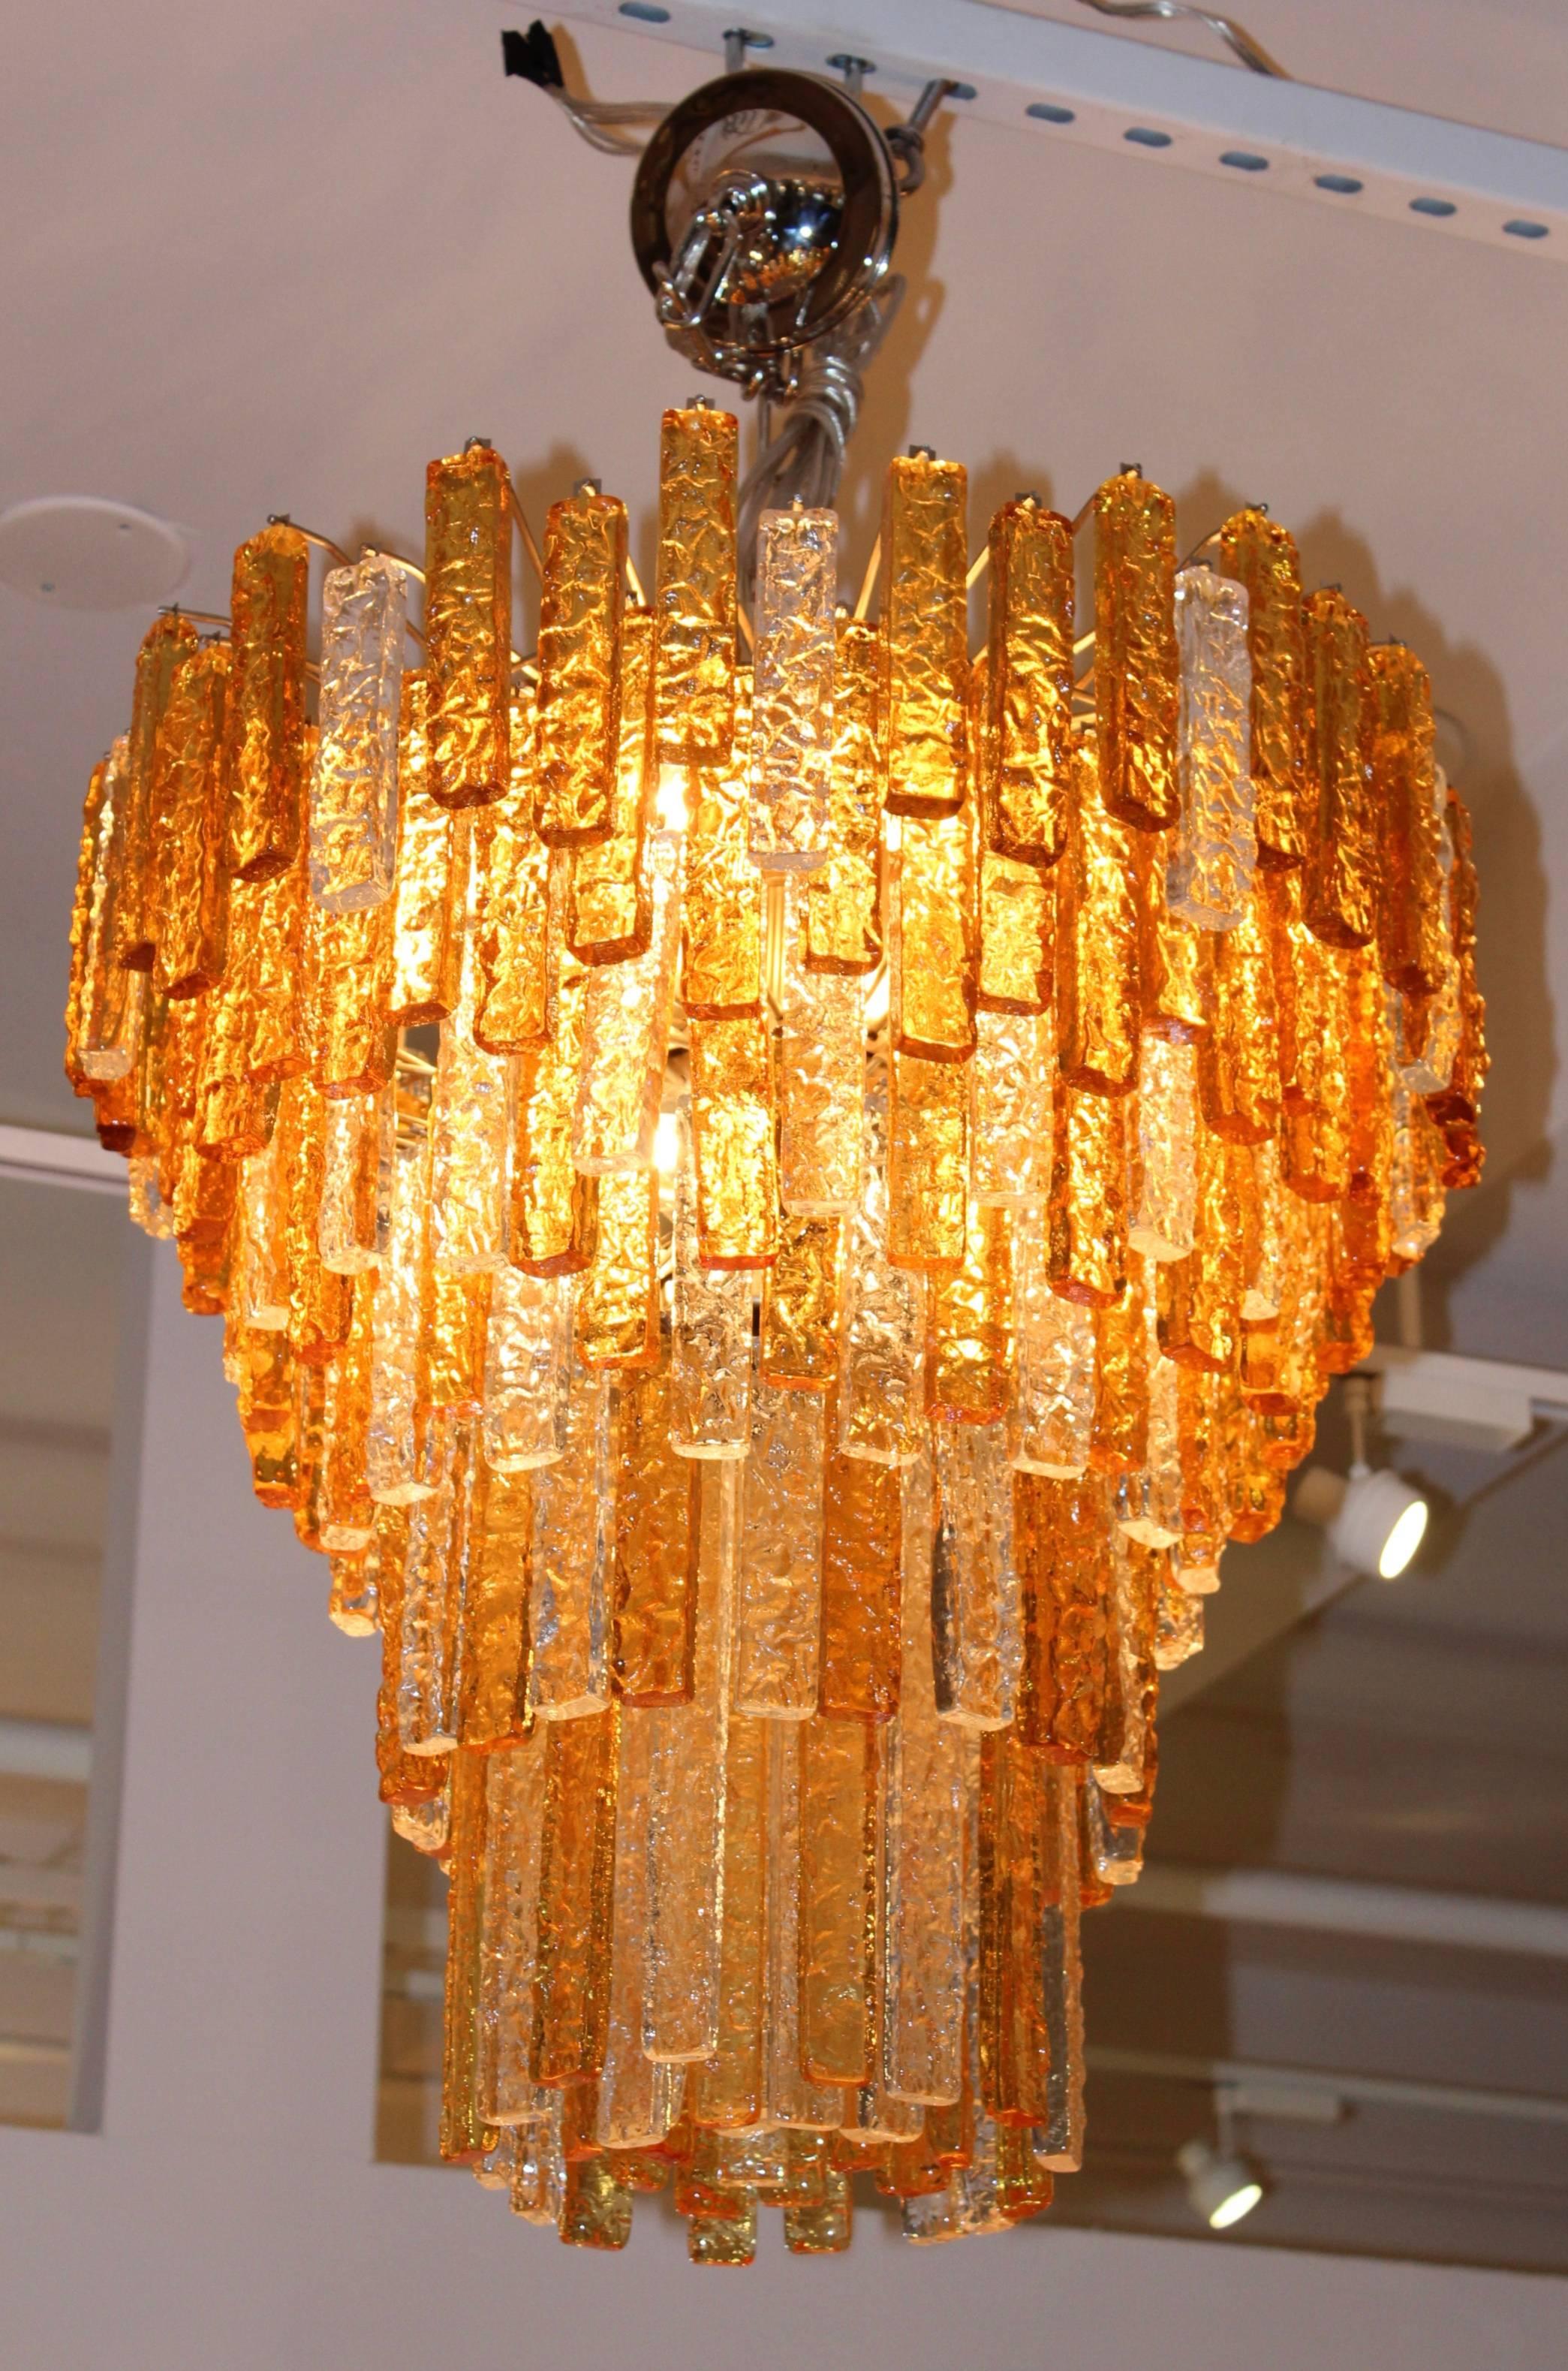 Stunning large 1960s Venini clear and amber glass chandelier. Newly professionally rewired and ready to use.

Frame and glass height 24.5''

The chain height can be adjusted.